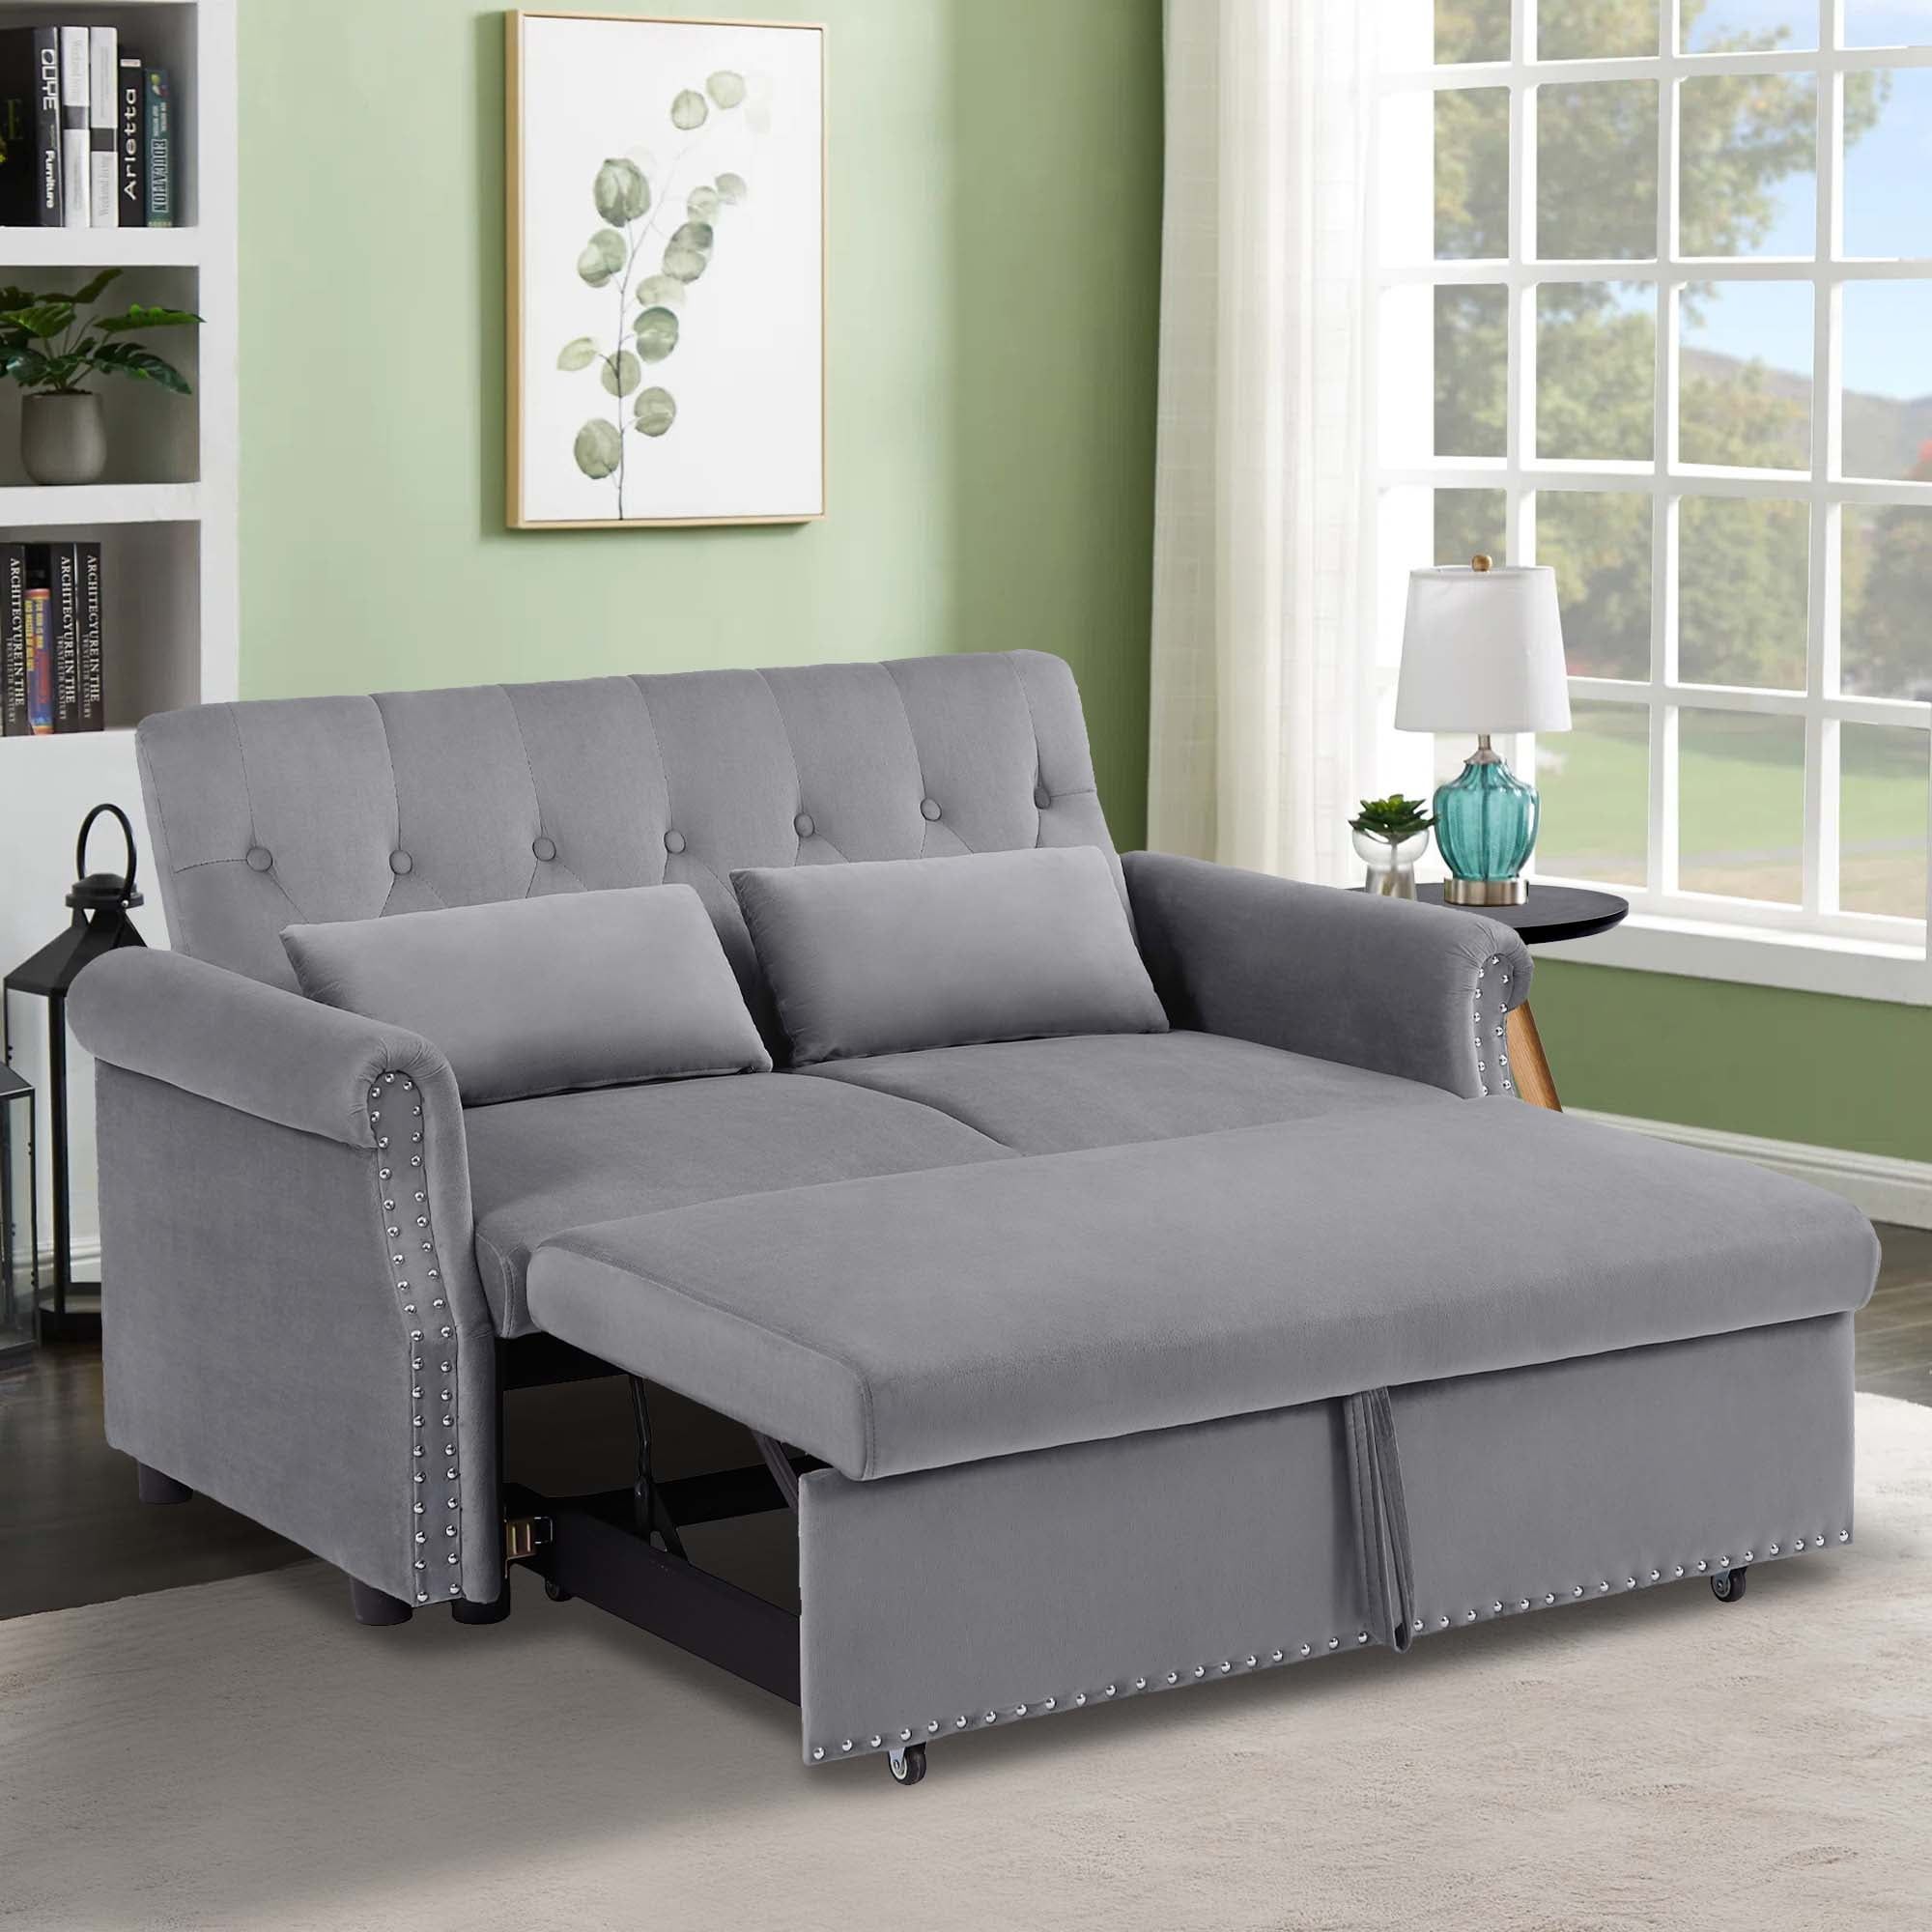 Aukfa 55" Convertible Sleeper Sofa Bed With Pull Out Couch, Velvet Tufted  Button Backrest Loveseat – Gray – Walmart For Tufted Convertible Sleeper Sofas (View 7 of 15)